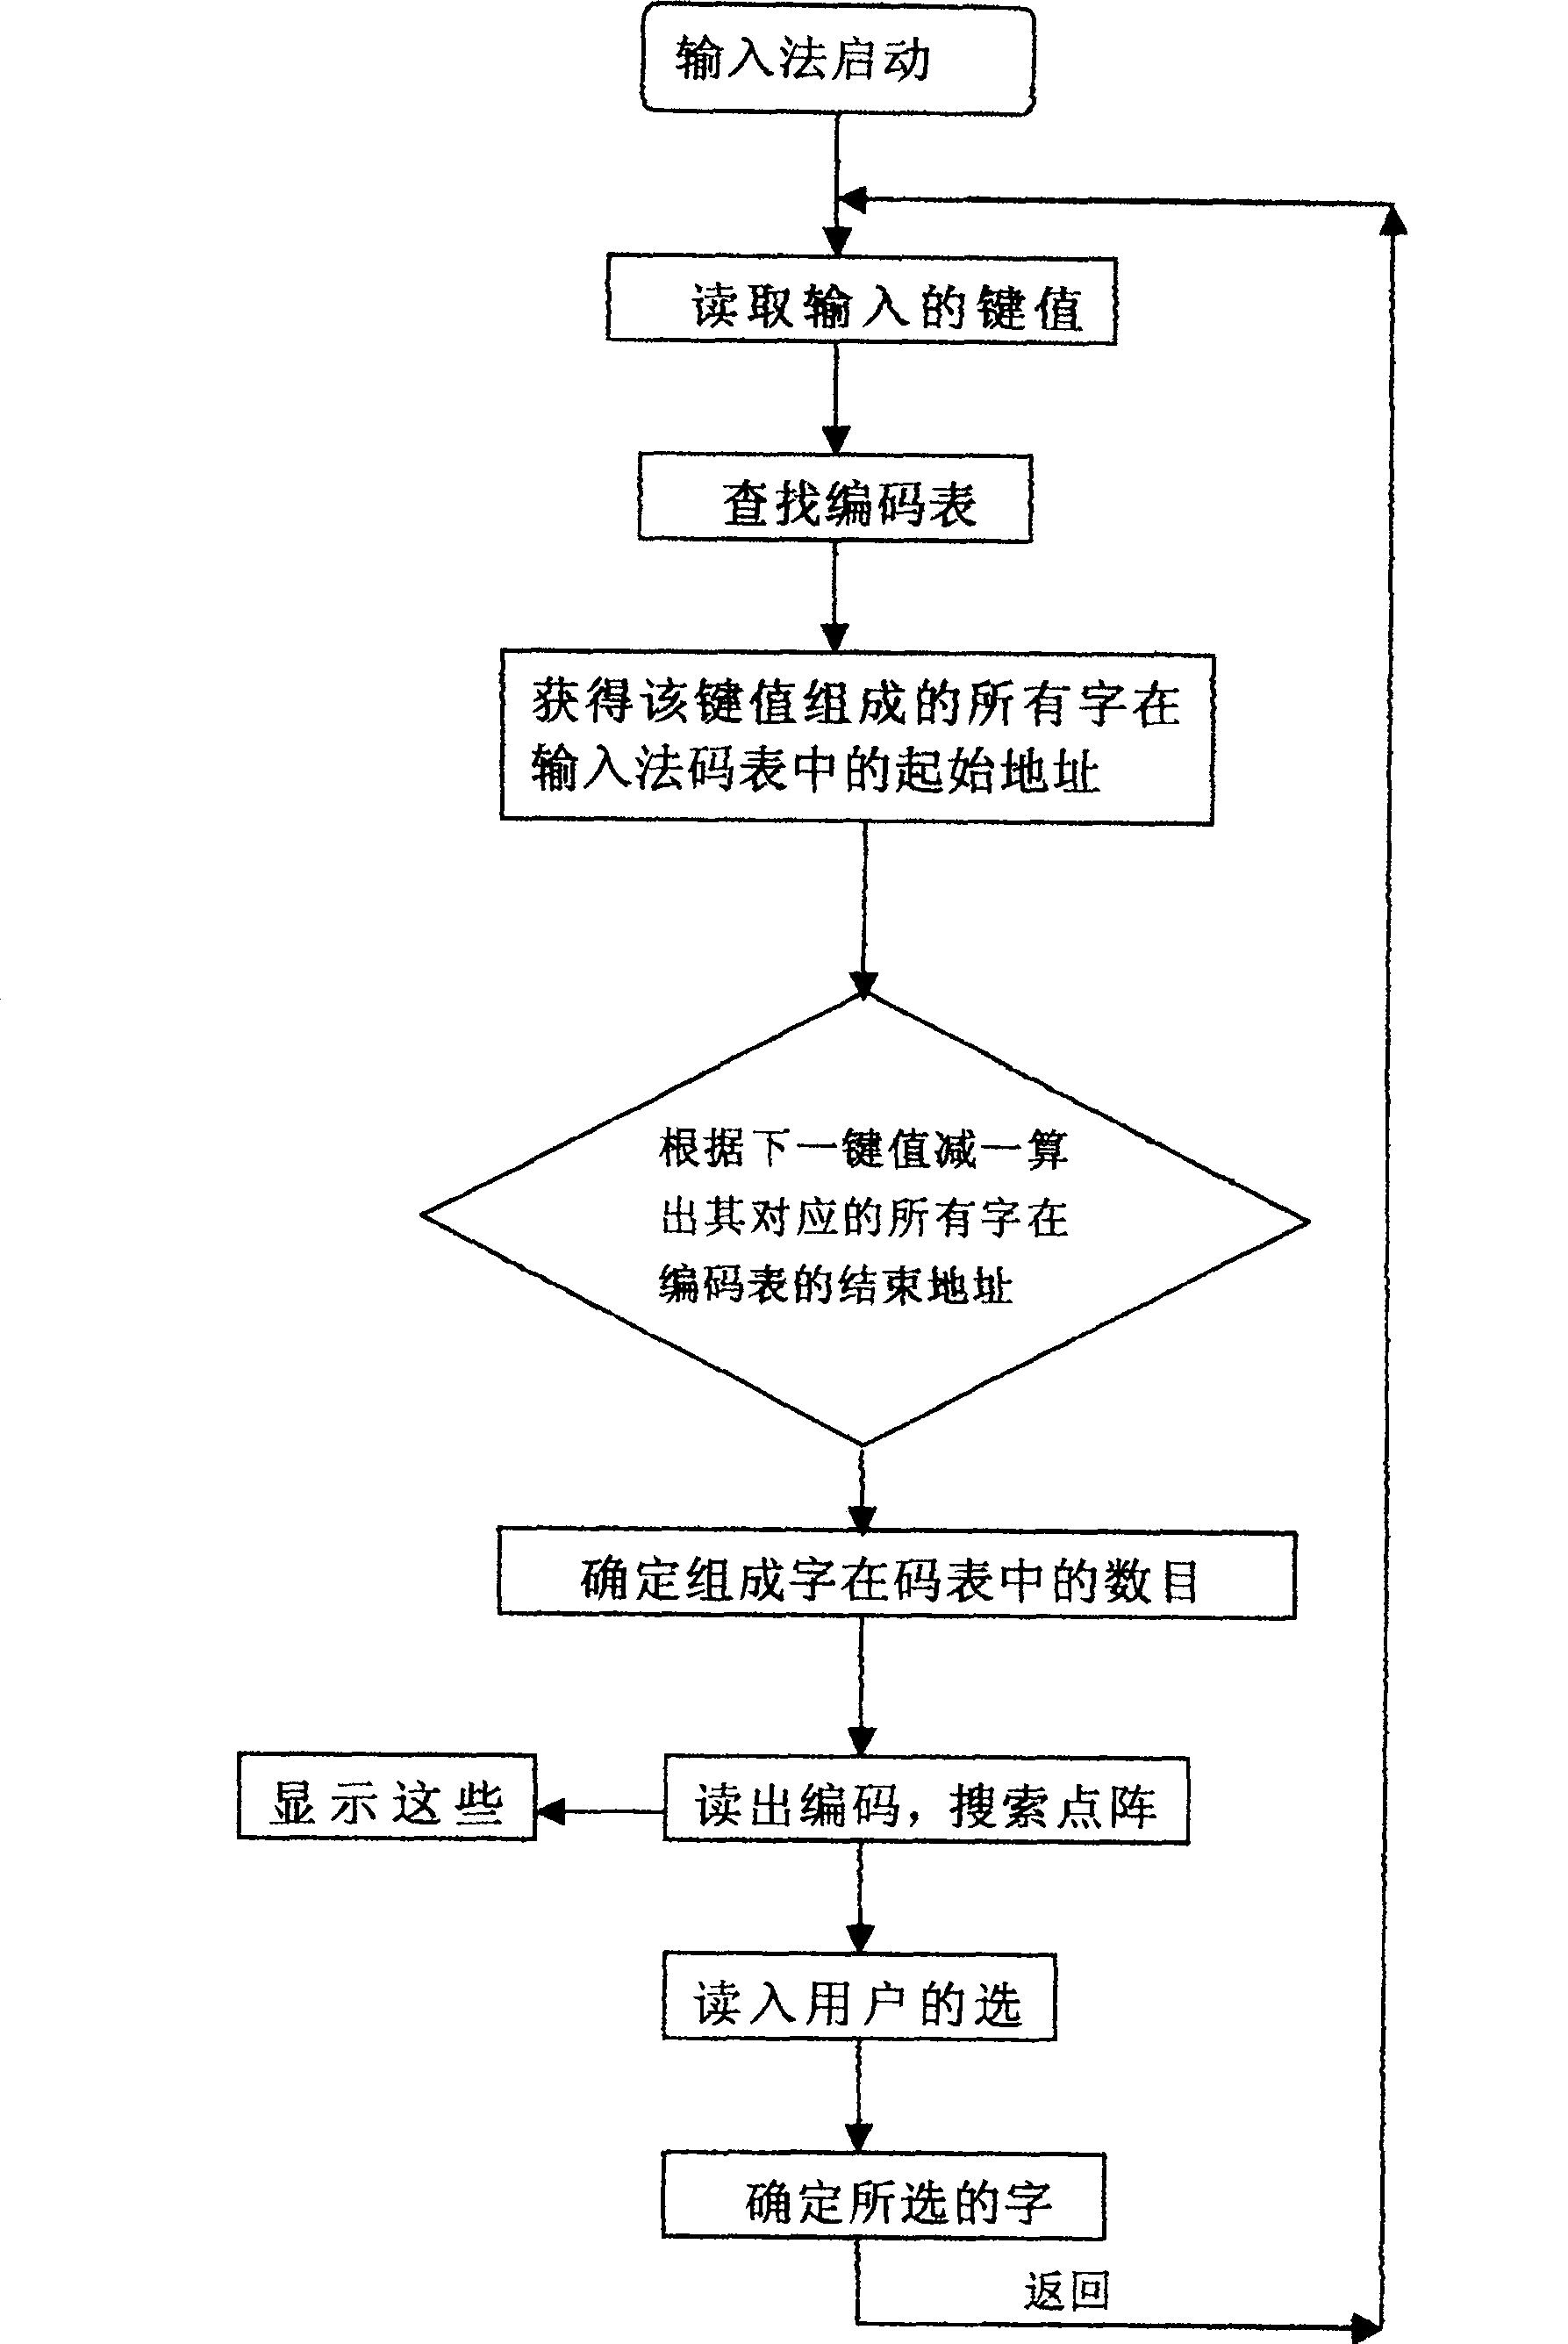 Method for realizing Tibetan language input, display and short-message reception and transmission on hand-held electronic terminal